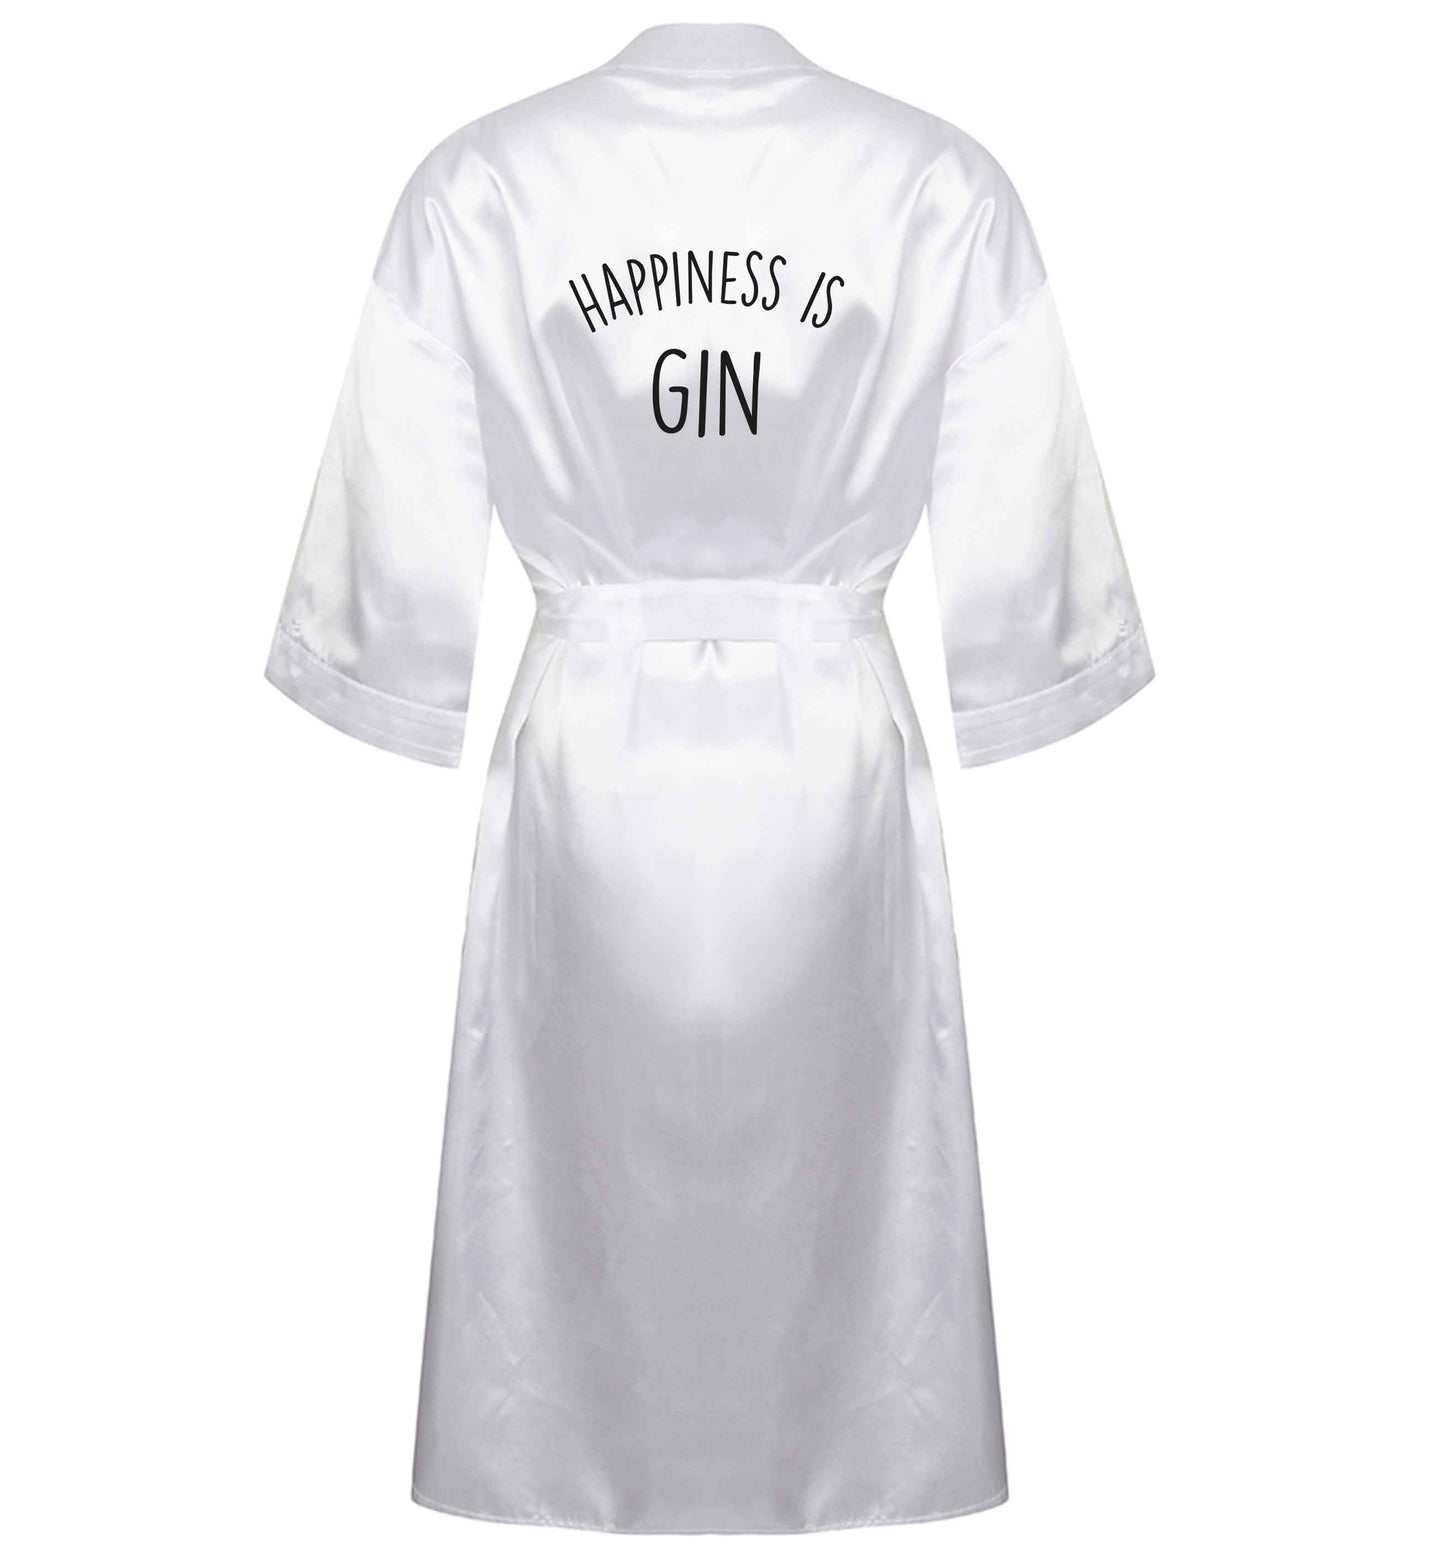 Happiness is gin XL/XXL white ladies dressing gown size 16/18